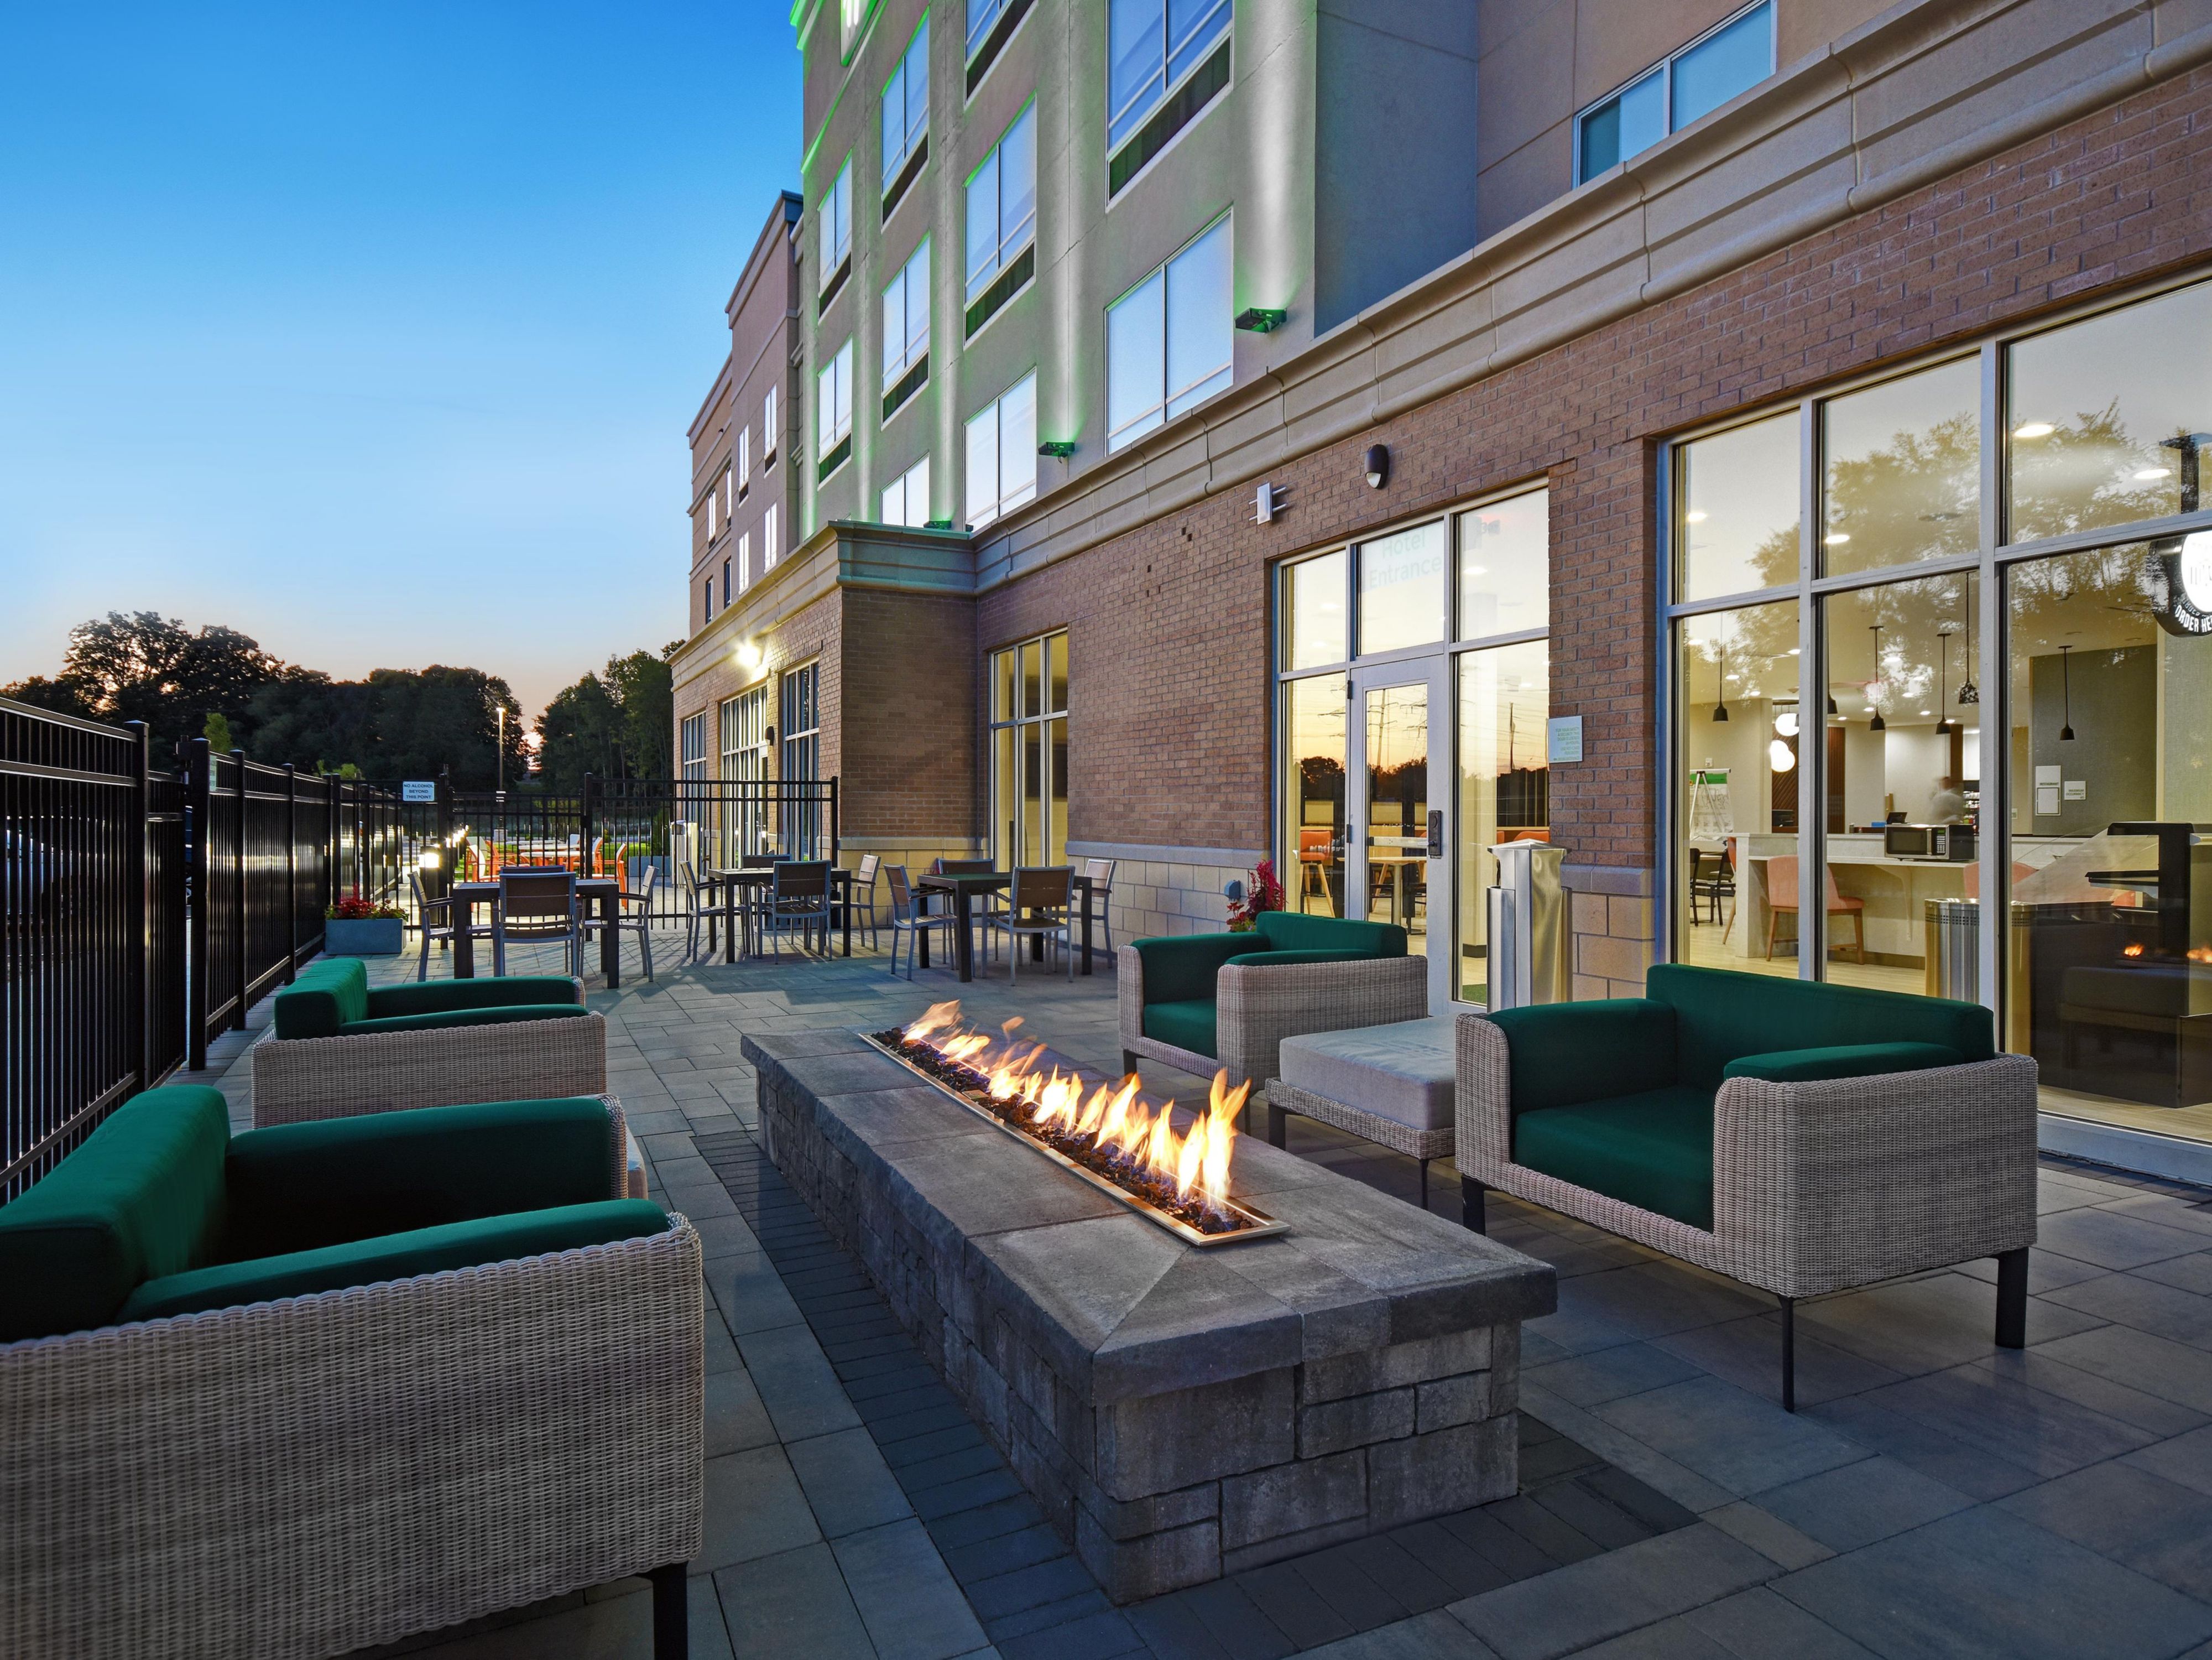 Relax and enjoy your favorite beverage next to our fire pit on the patio.